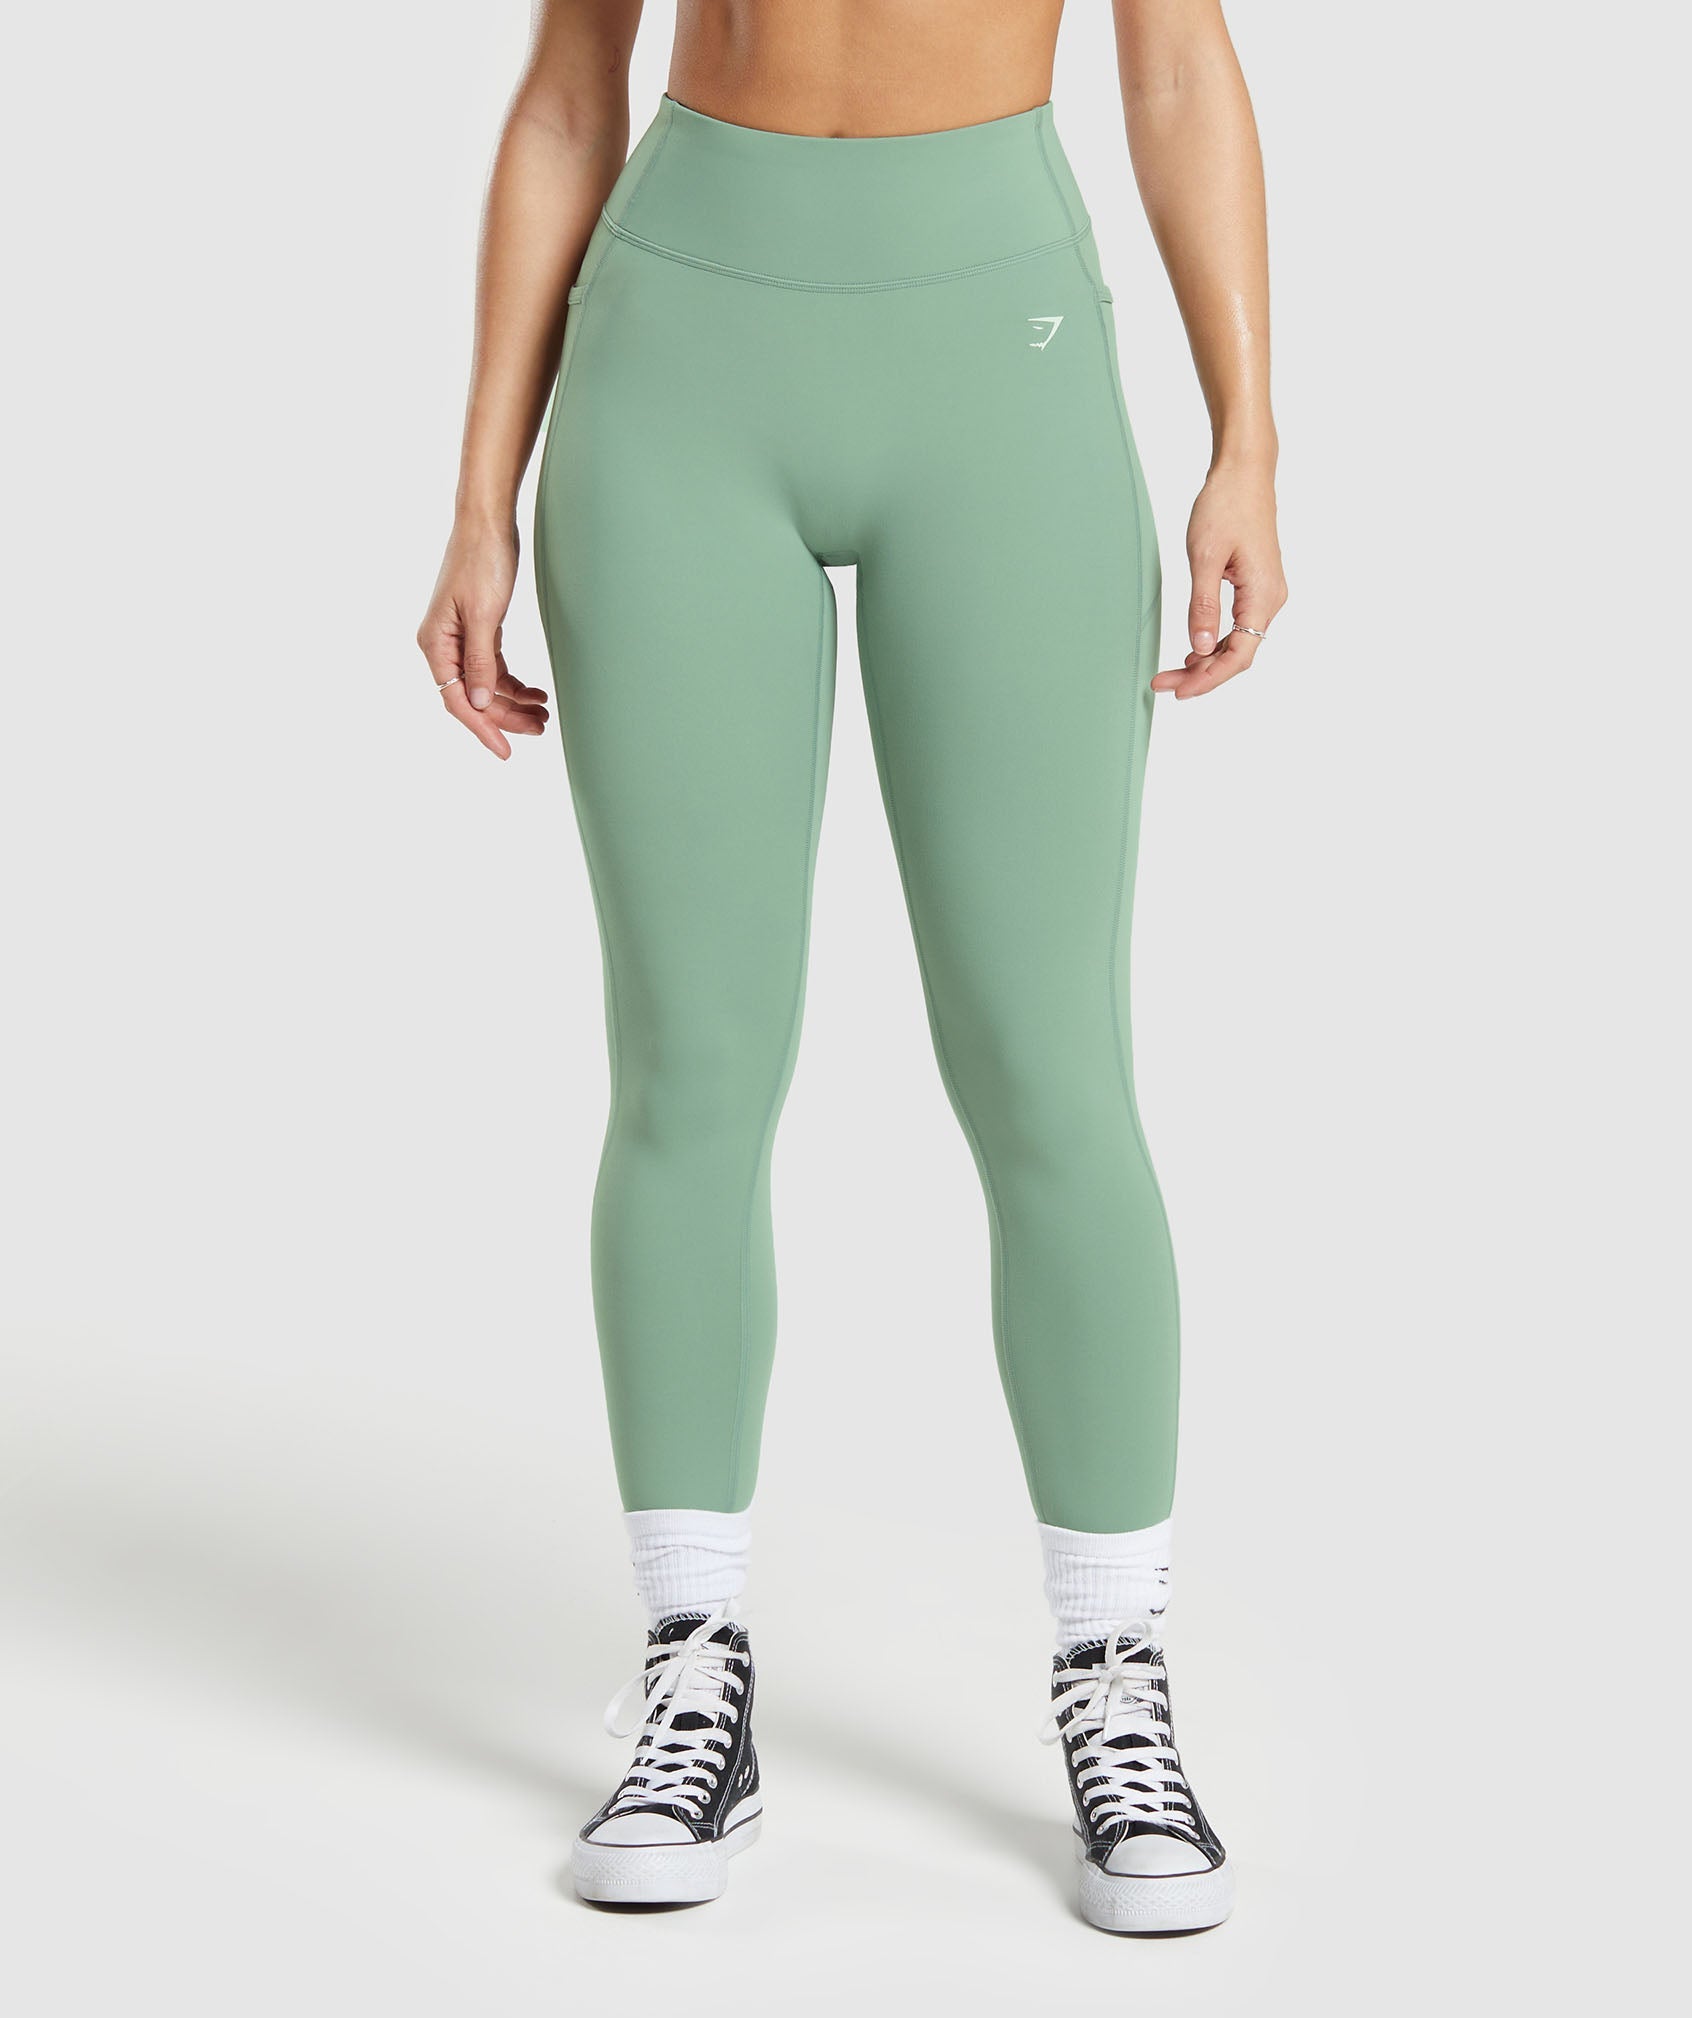 Workout leggings with pockets #leggingsoutfit #foryoupage #workout #sh